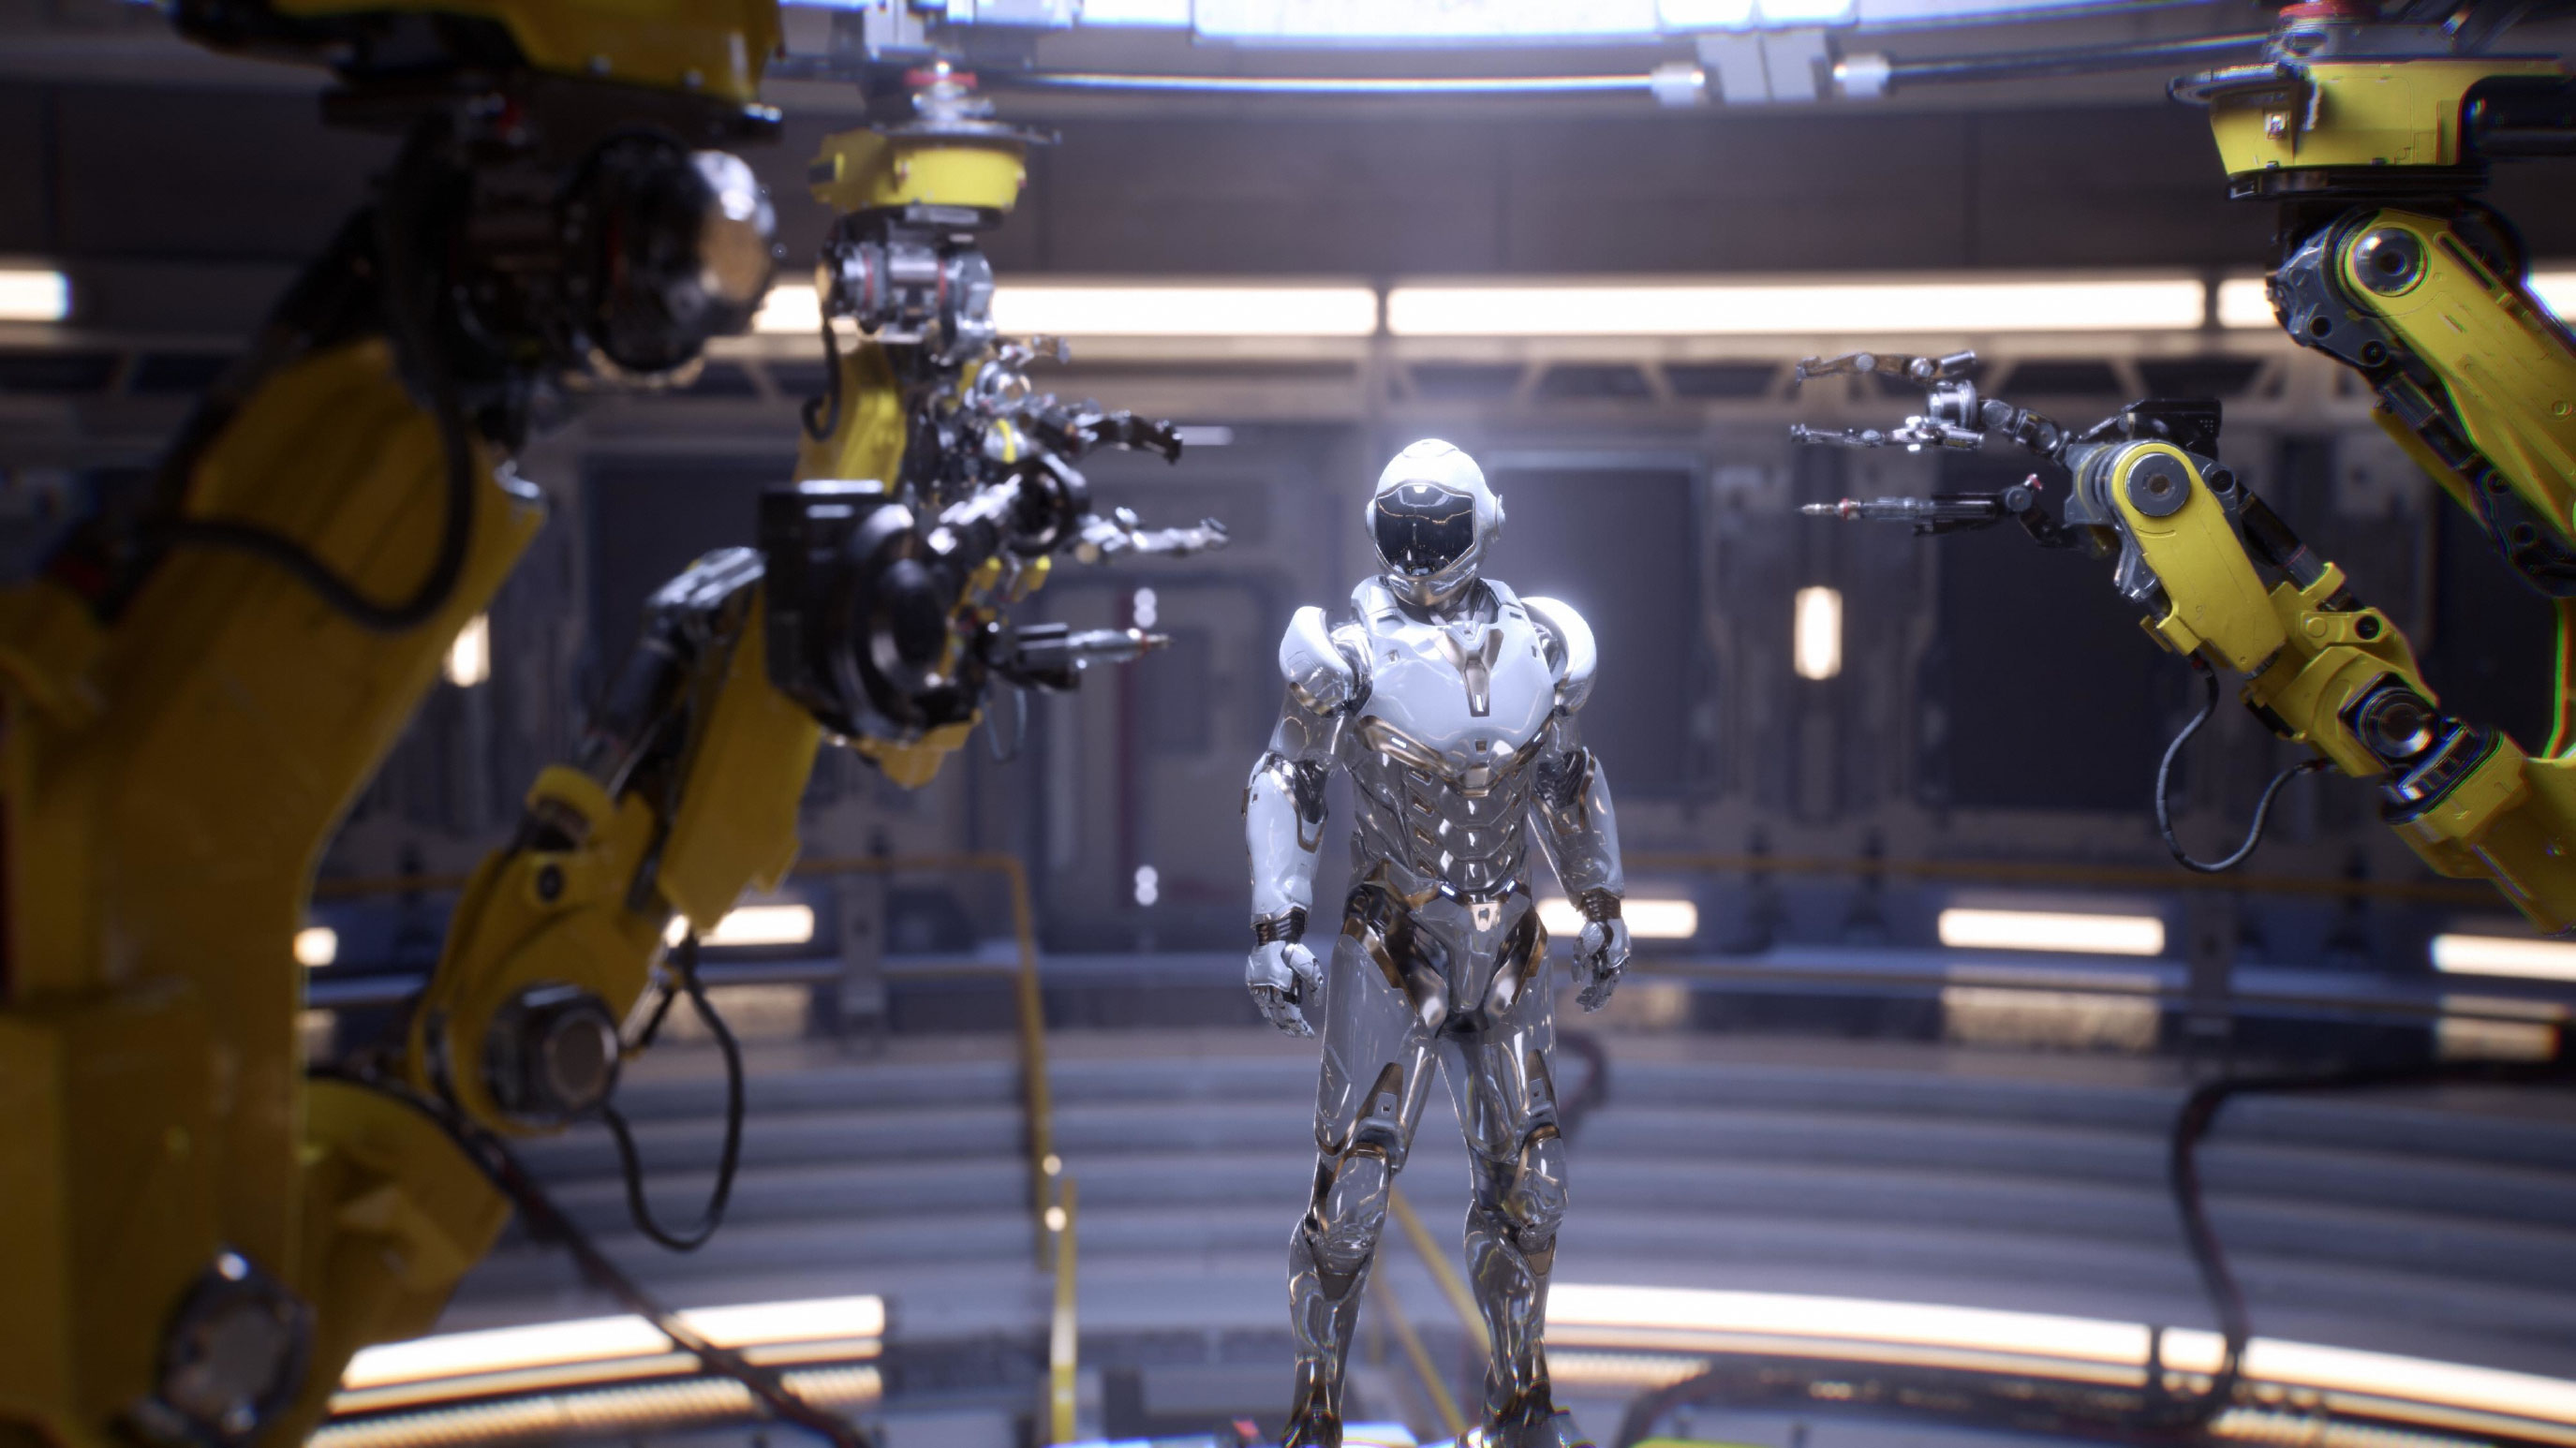 What Is Ray Tracing? (And What It Means for PC Gaming)